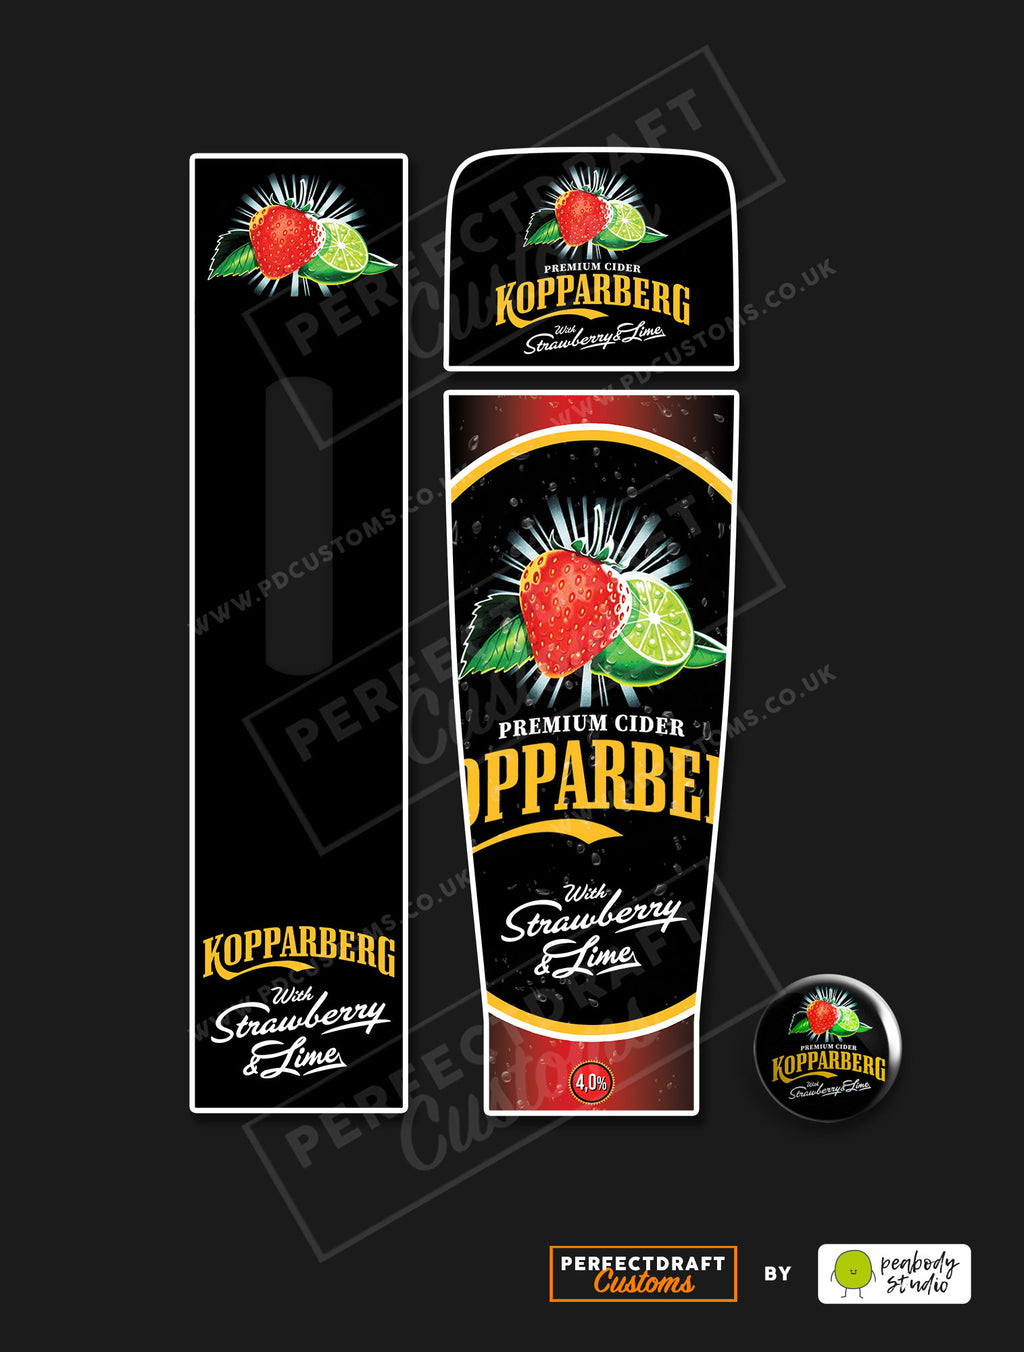 Kopparberg Strawberry and Lime Perfect Draft Skin